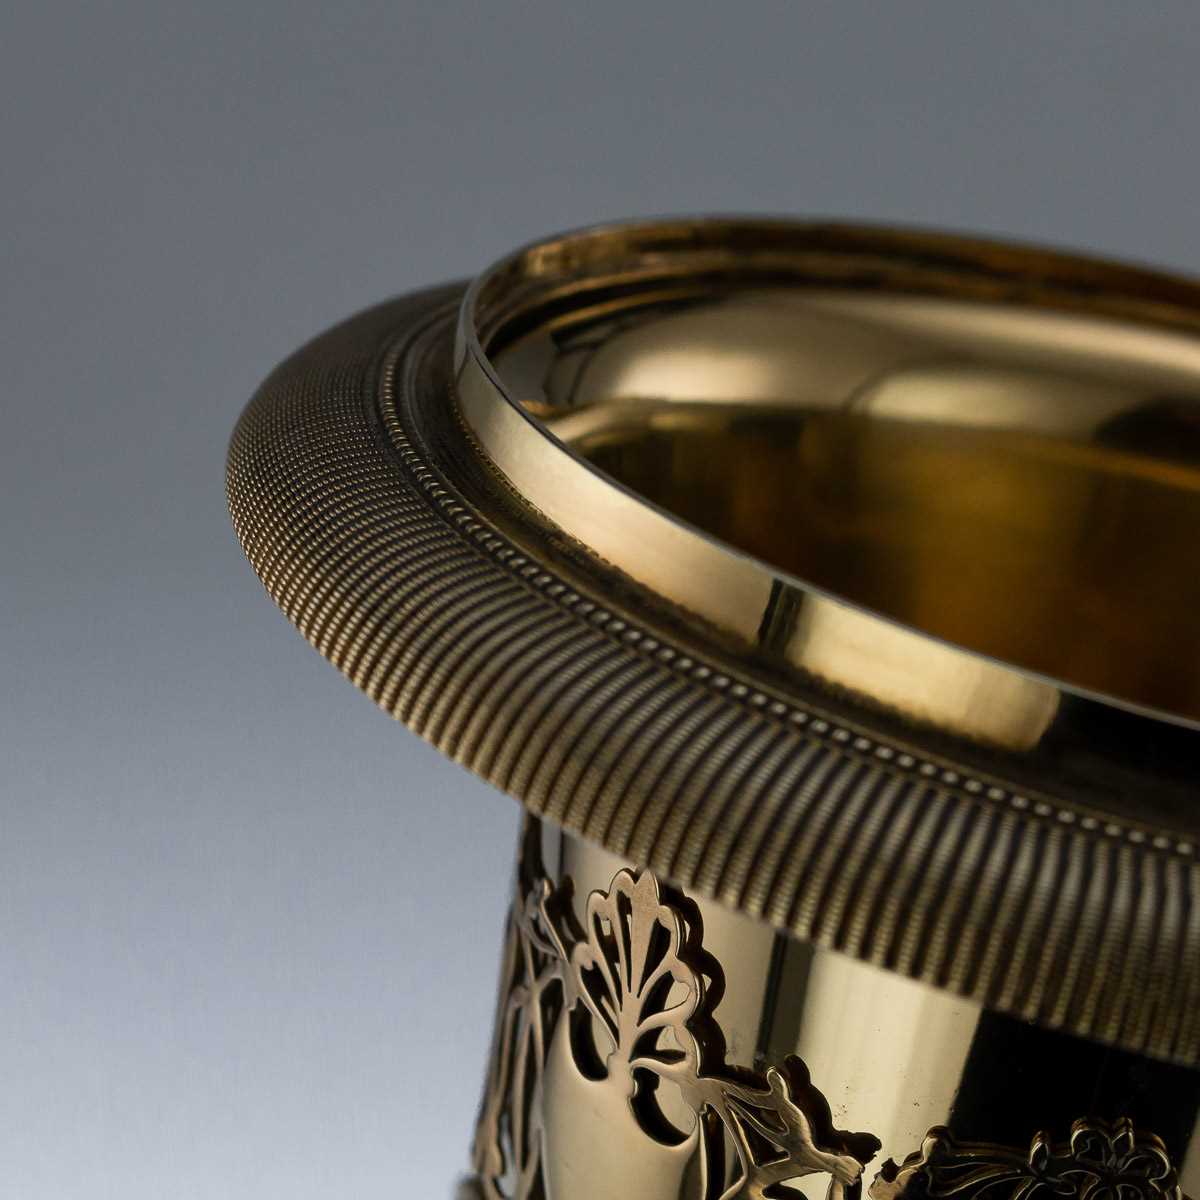 AN EARLY 19TH CENTURY SILVER GILT URN BY MARC JACQUART, PARIS - Image 19 of 19